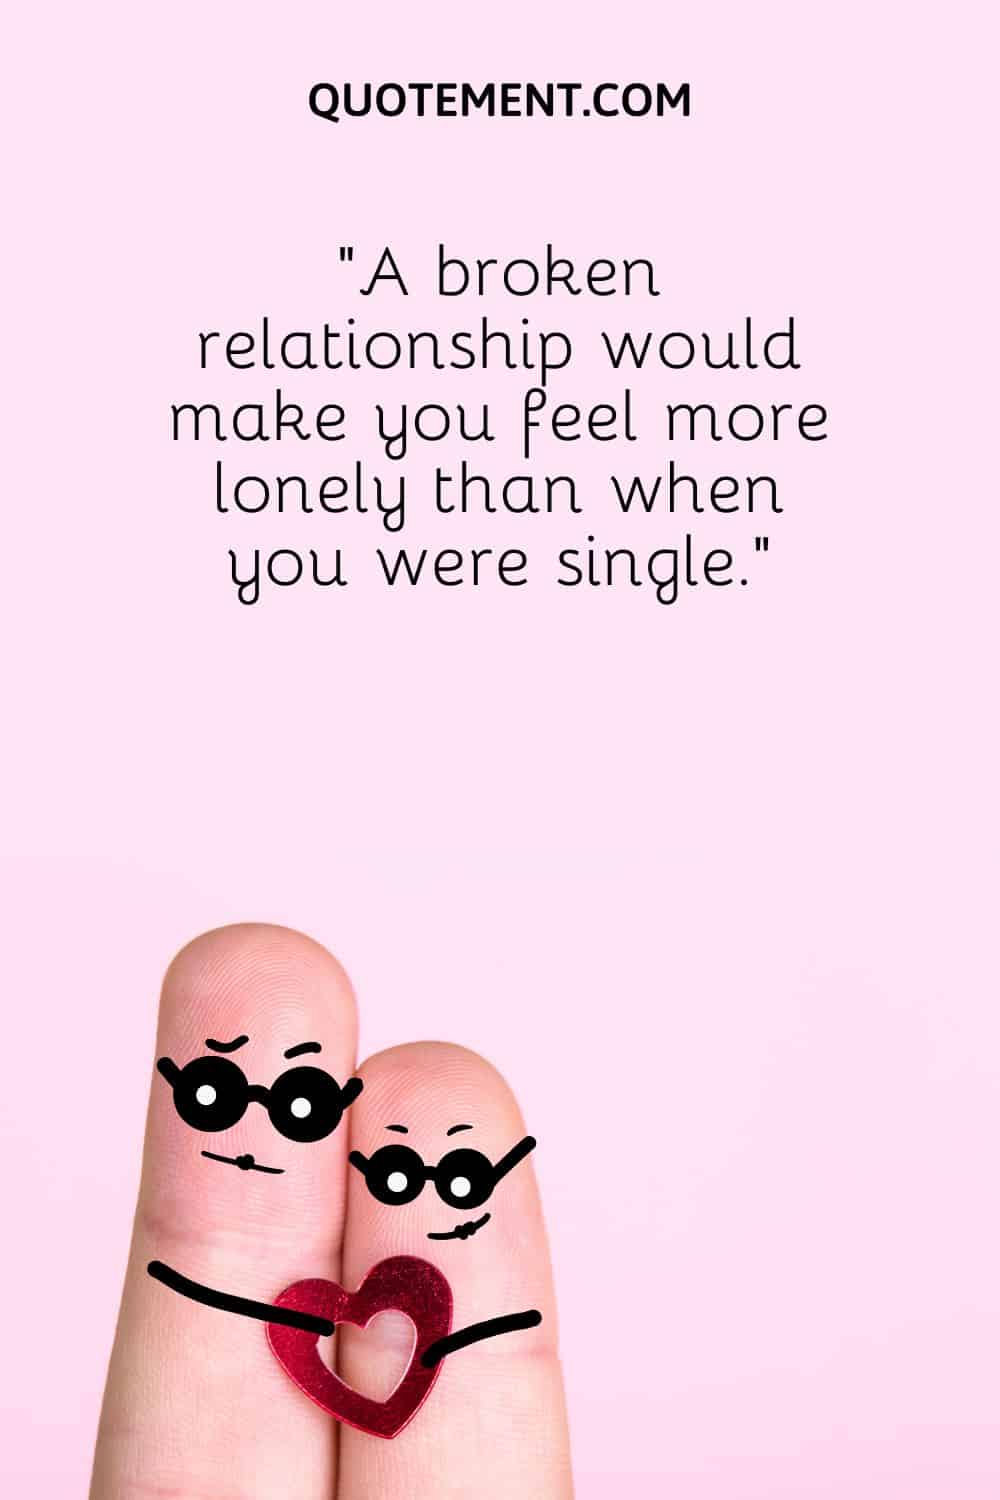 “A broken relationship would make you feel more lonely than when you were single.”